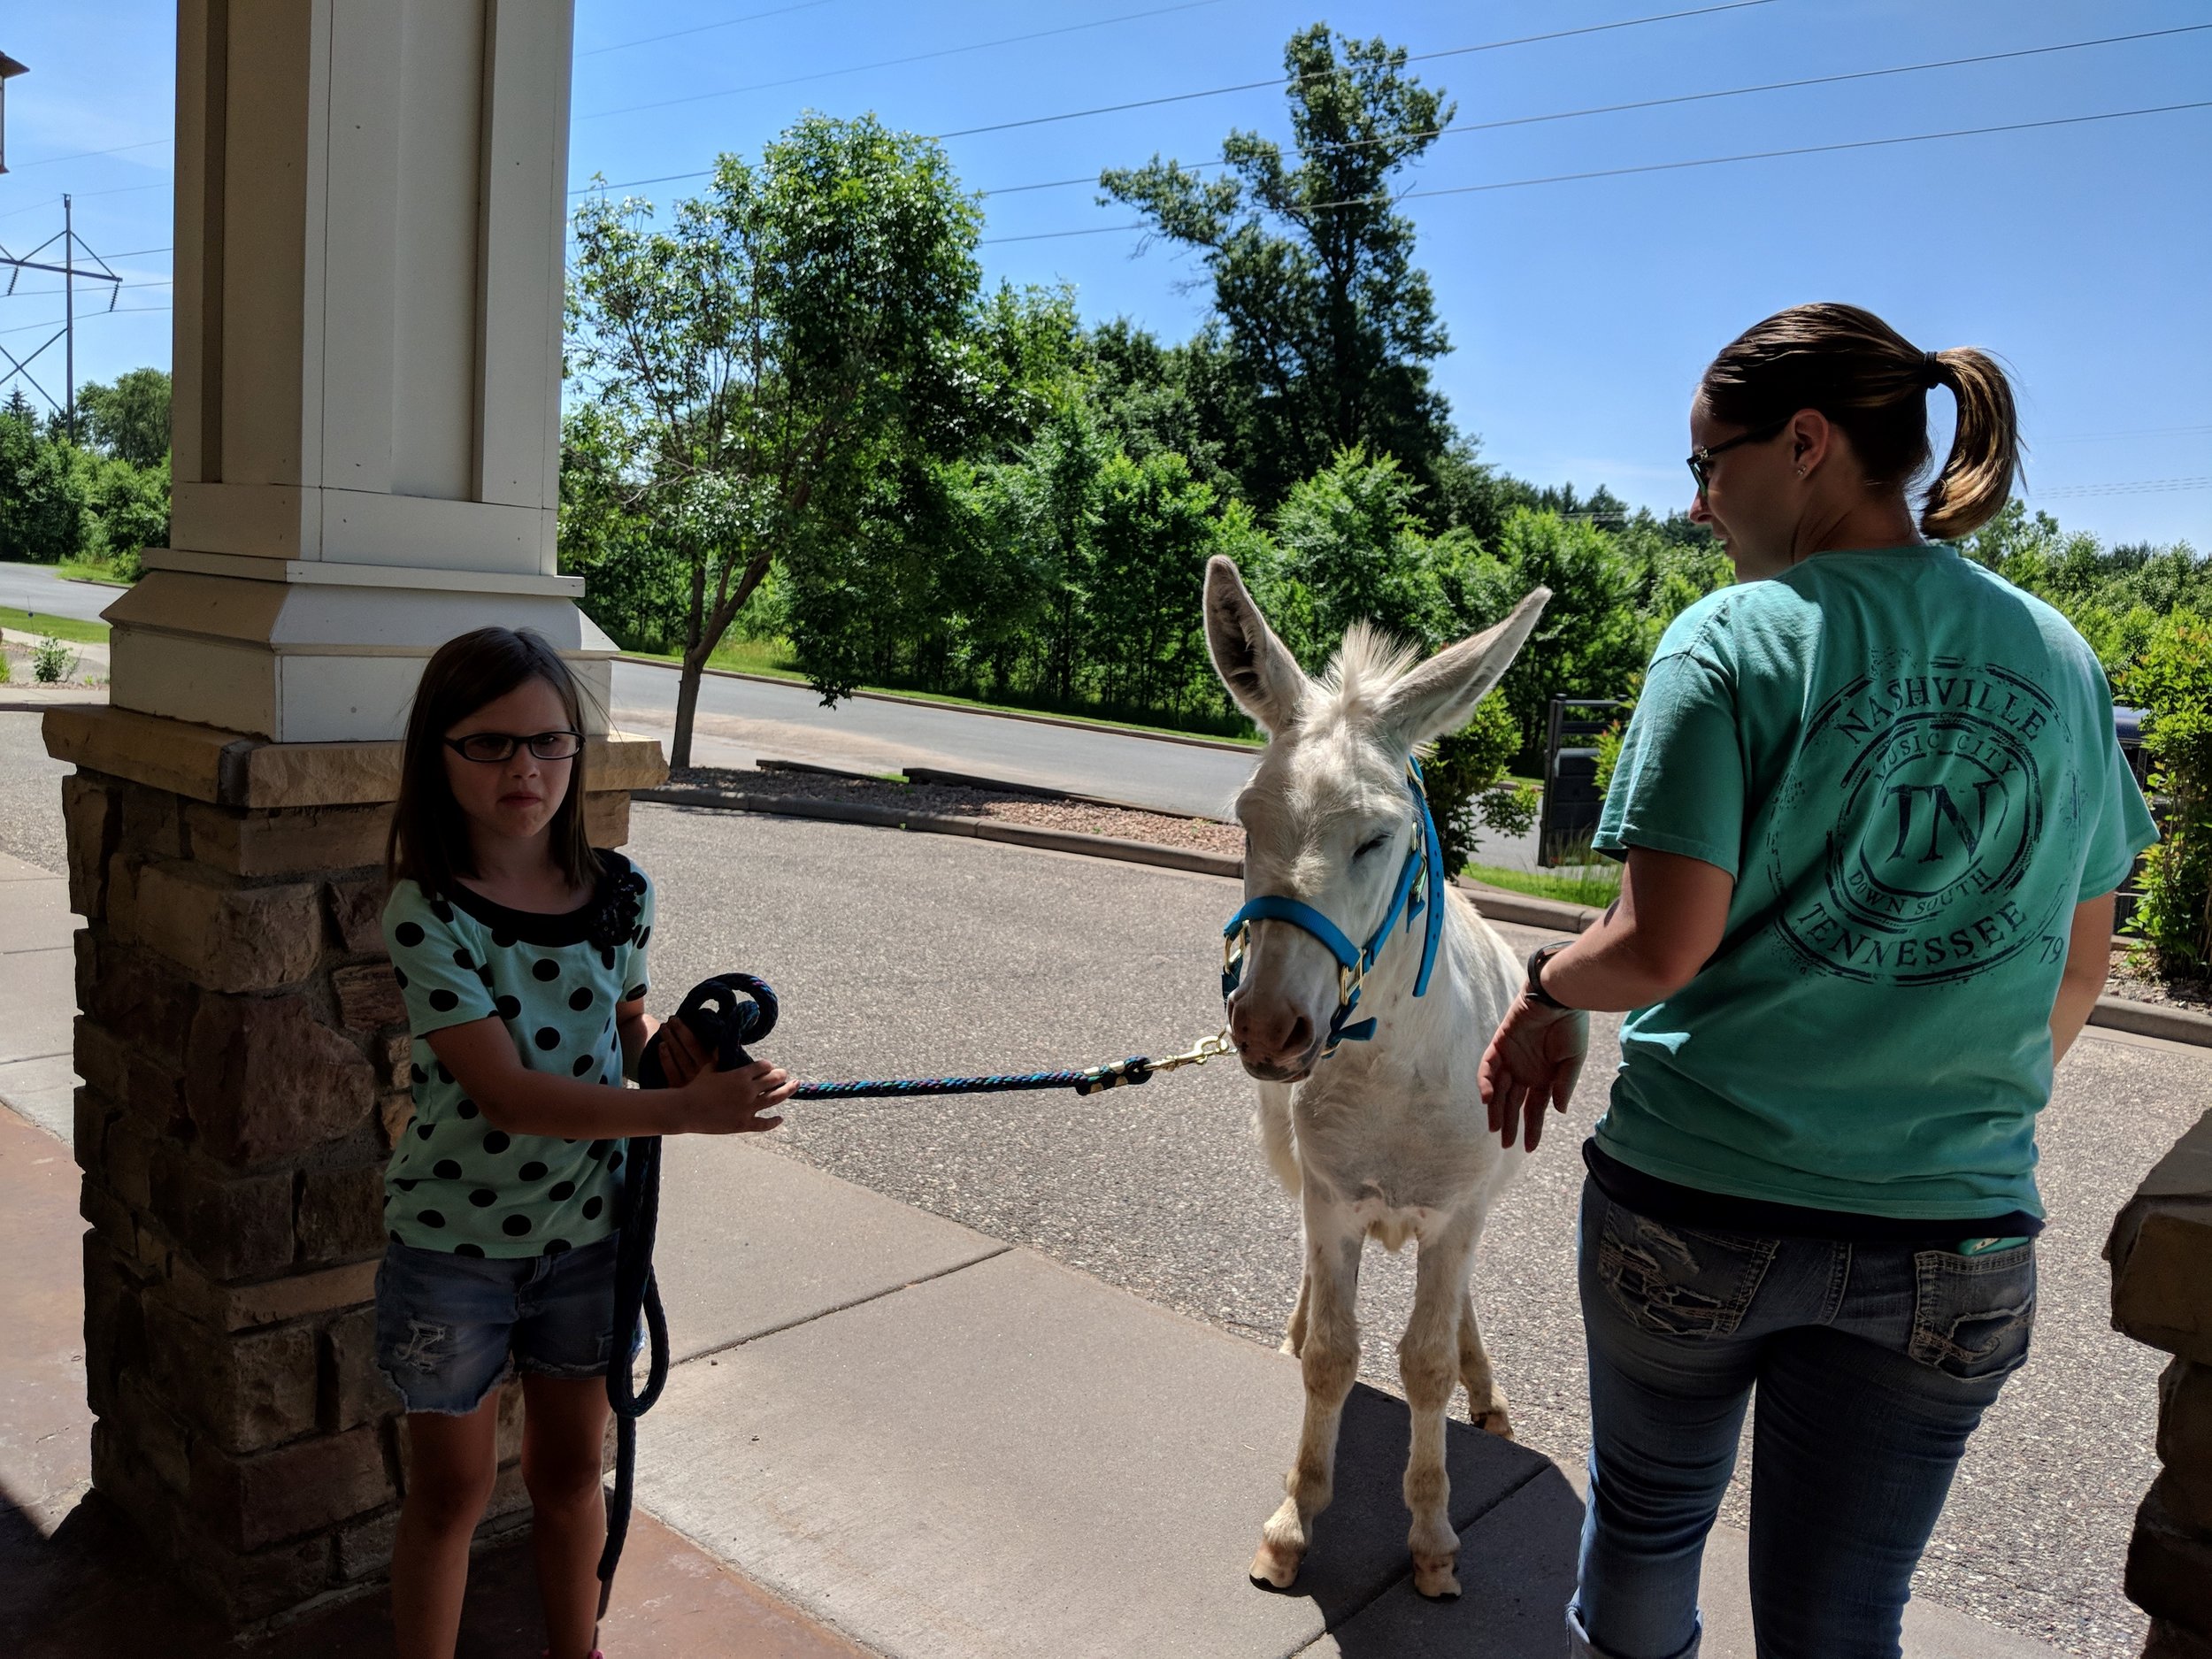 A visit from a fair calf & a donkey!! Thank you Courtney for sharing your time and animals with our tenants! 3.jpg